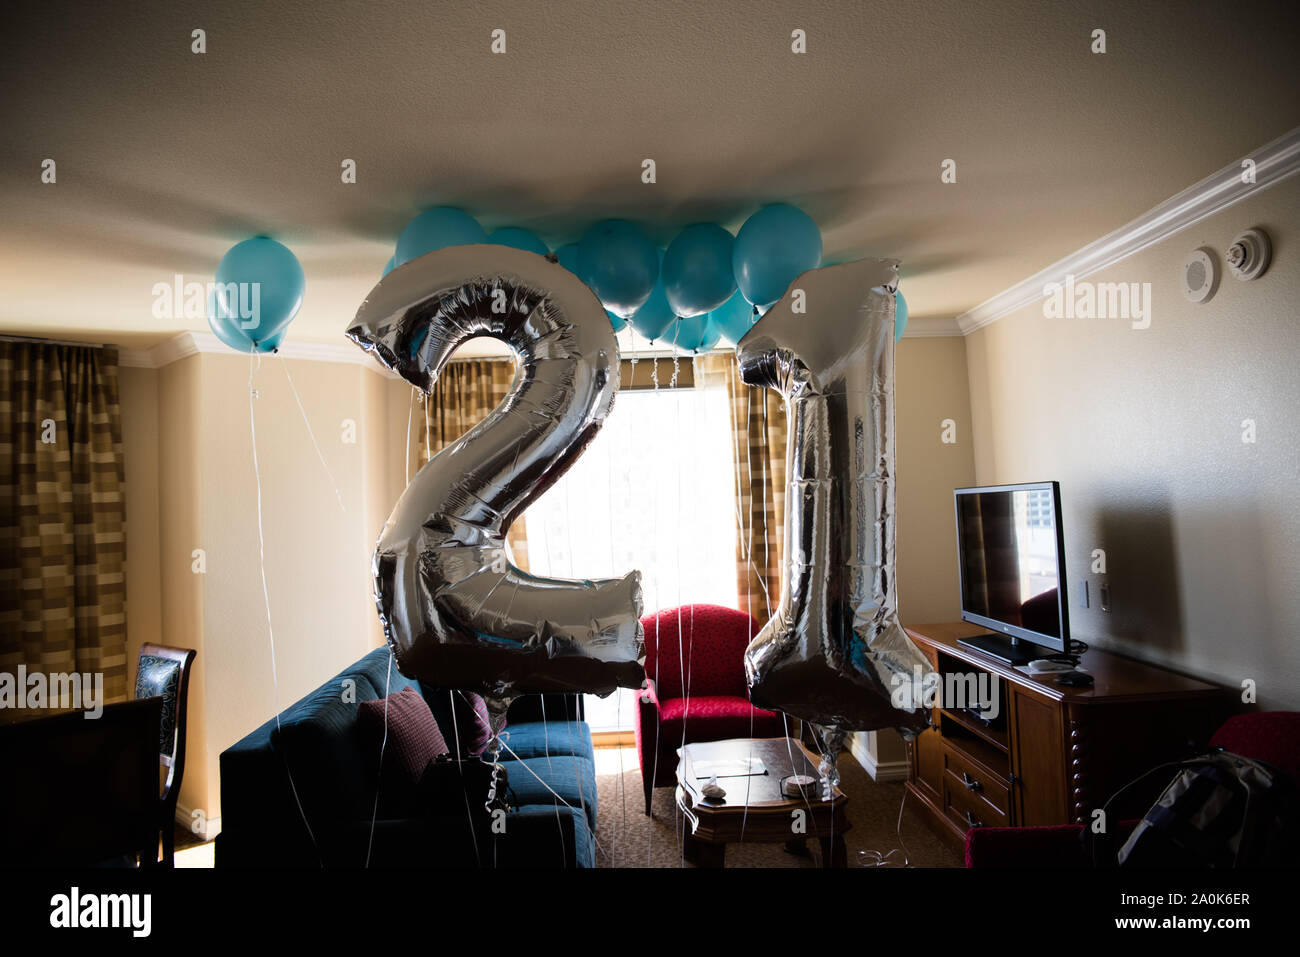 Shiny silver and blue 21 birthday balloons hanging from room ceiling Stock Photo